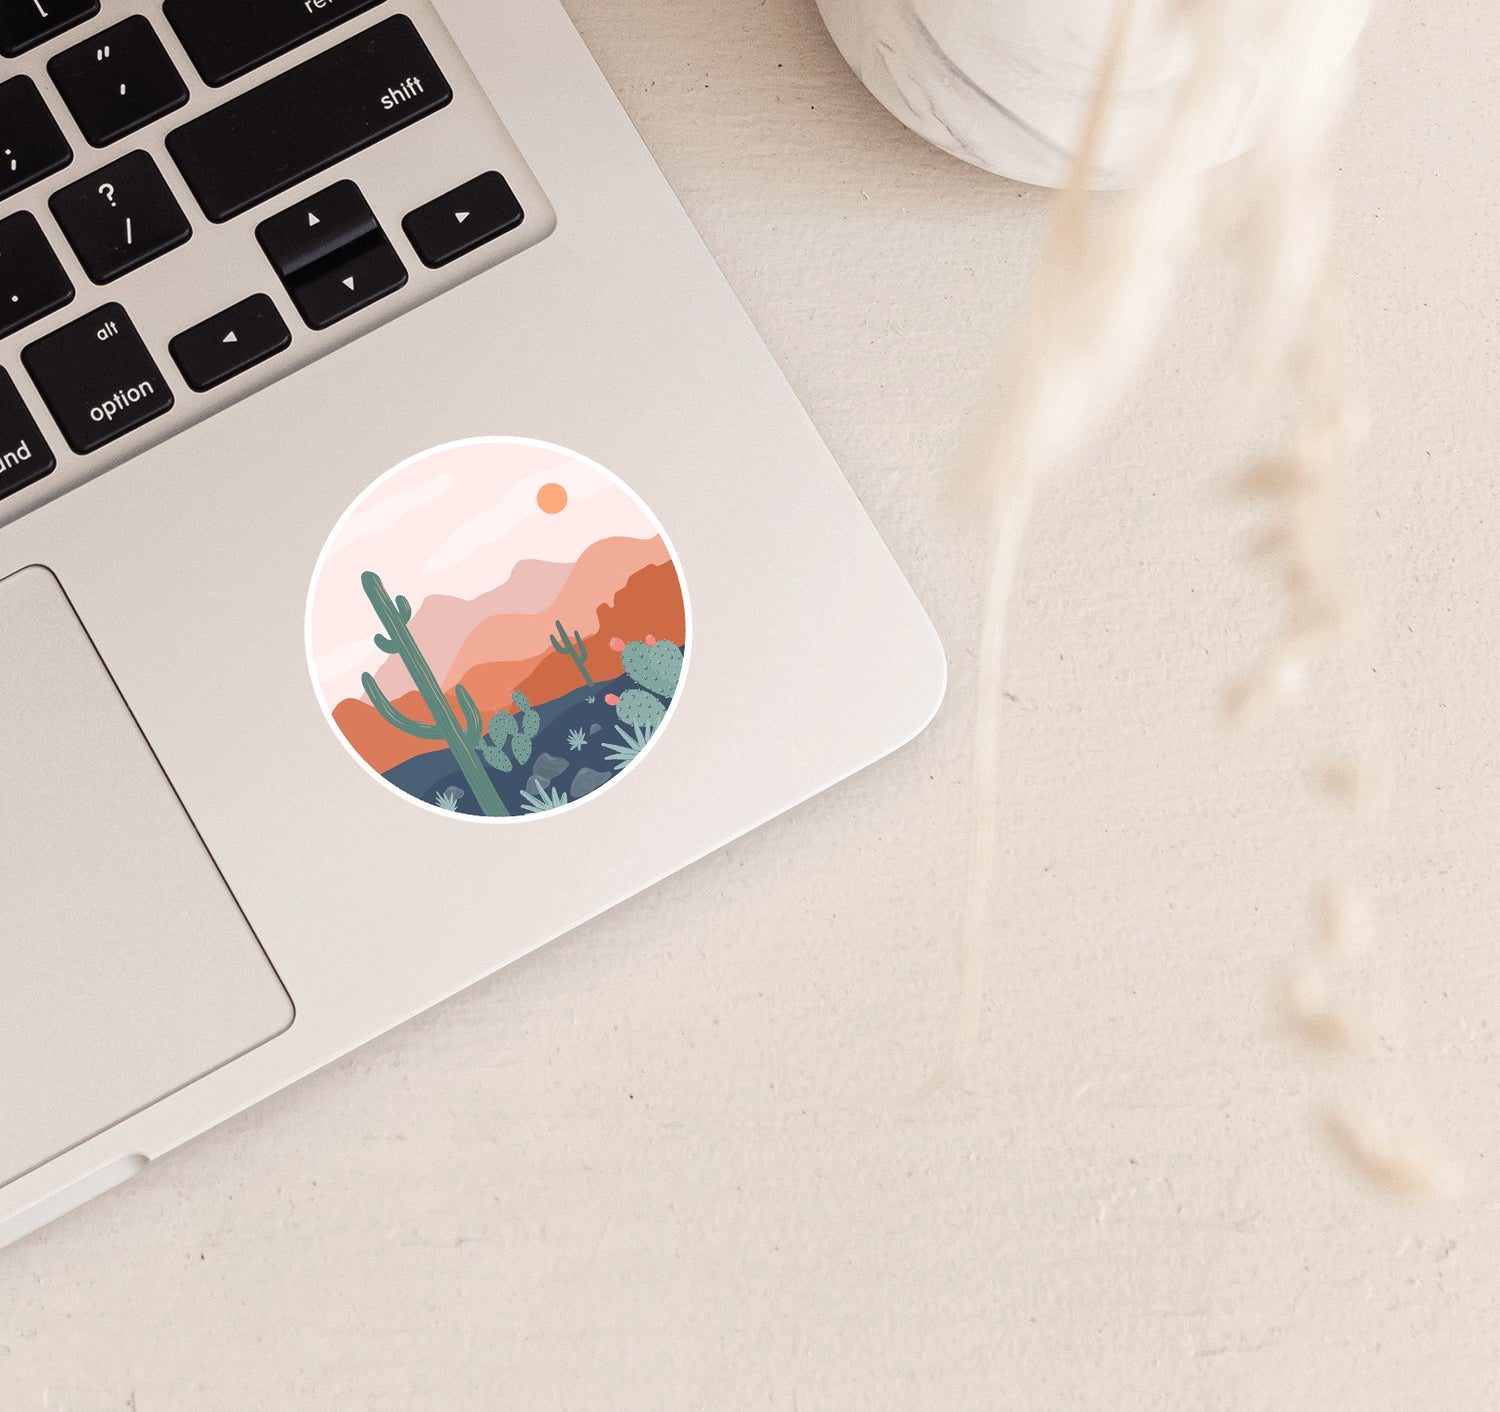 Round boho sticker of desert scenery with a saguaro cactus and the mountains at sunset